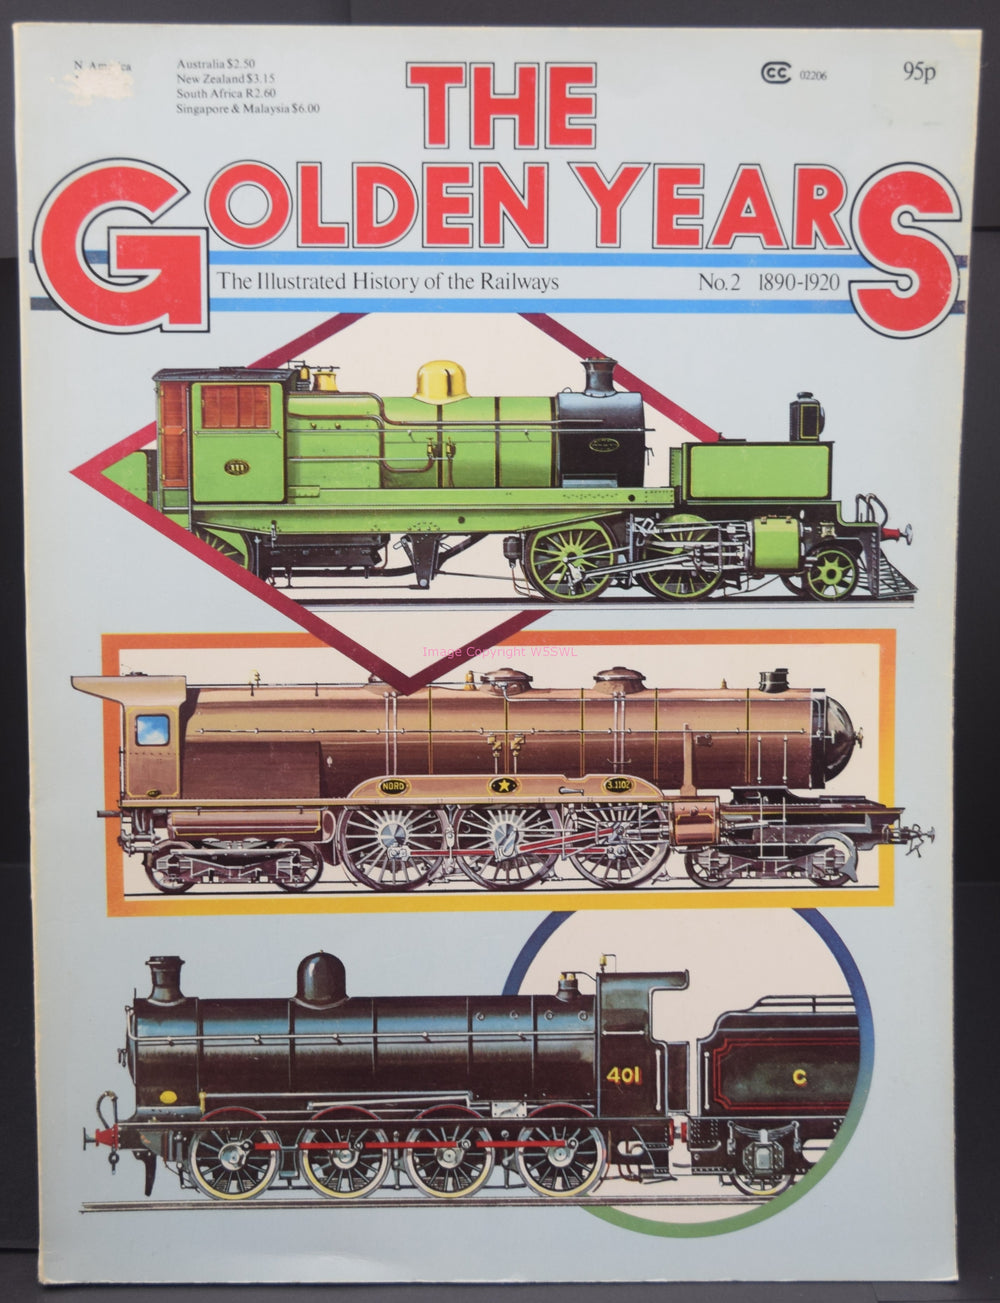 The Golden Years The Illustrated History of the Railways No 2 1890-1920 - Dave's Hobby Shop by W5SWL